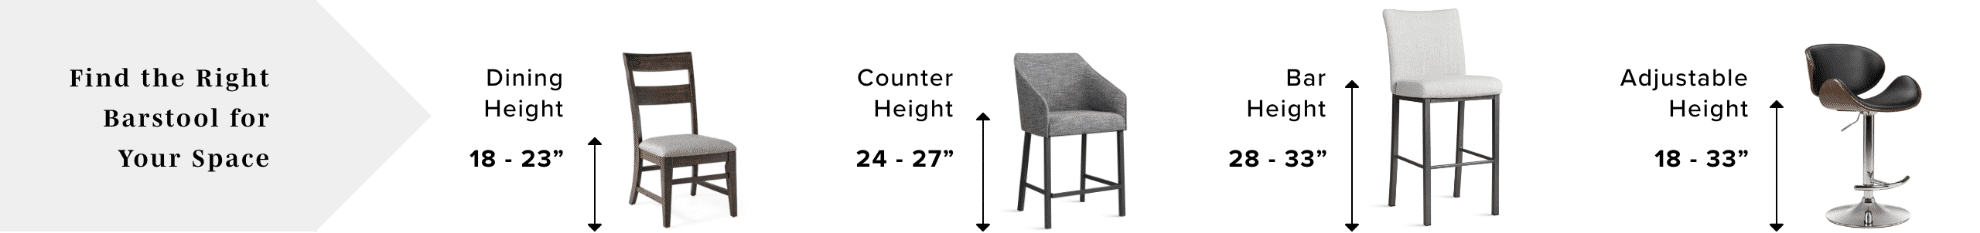 Find the Right Bar Stool for Your Space